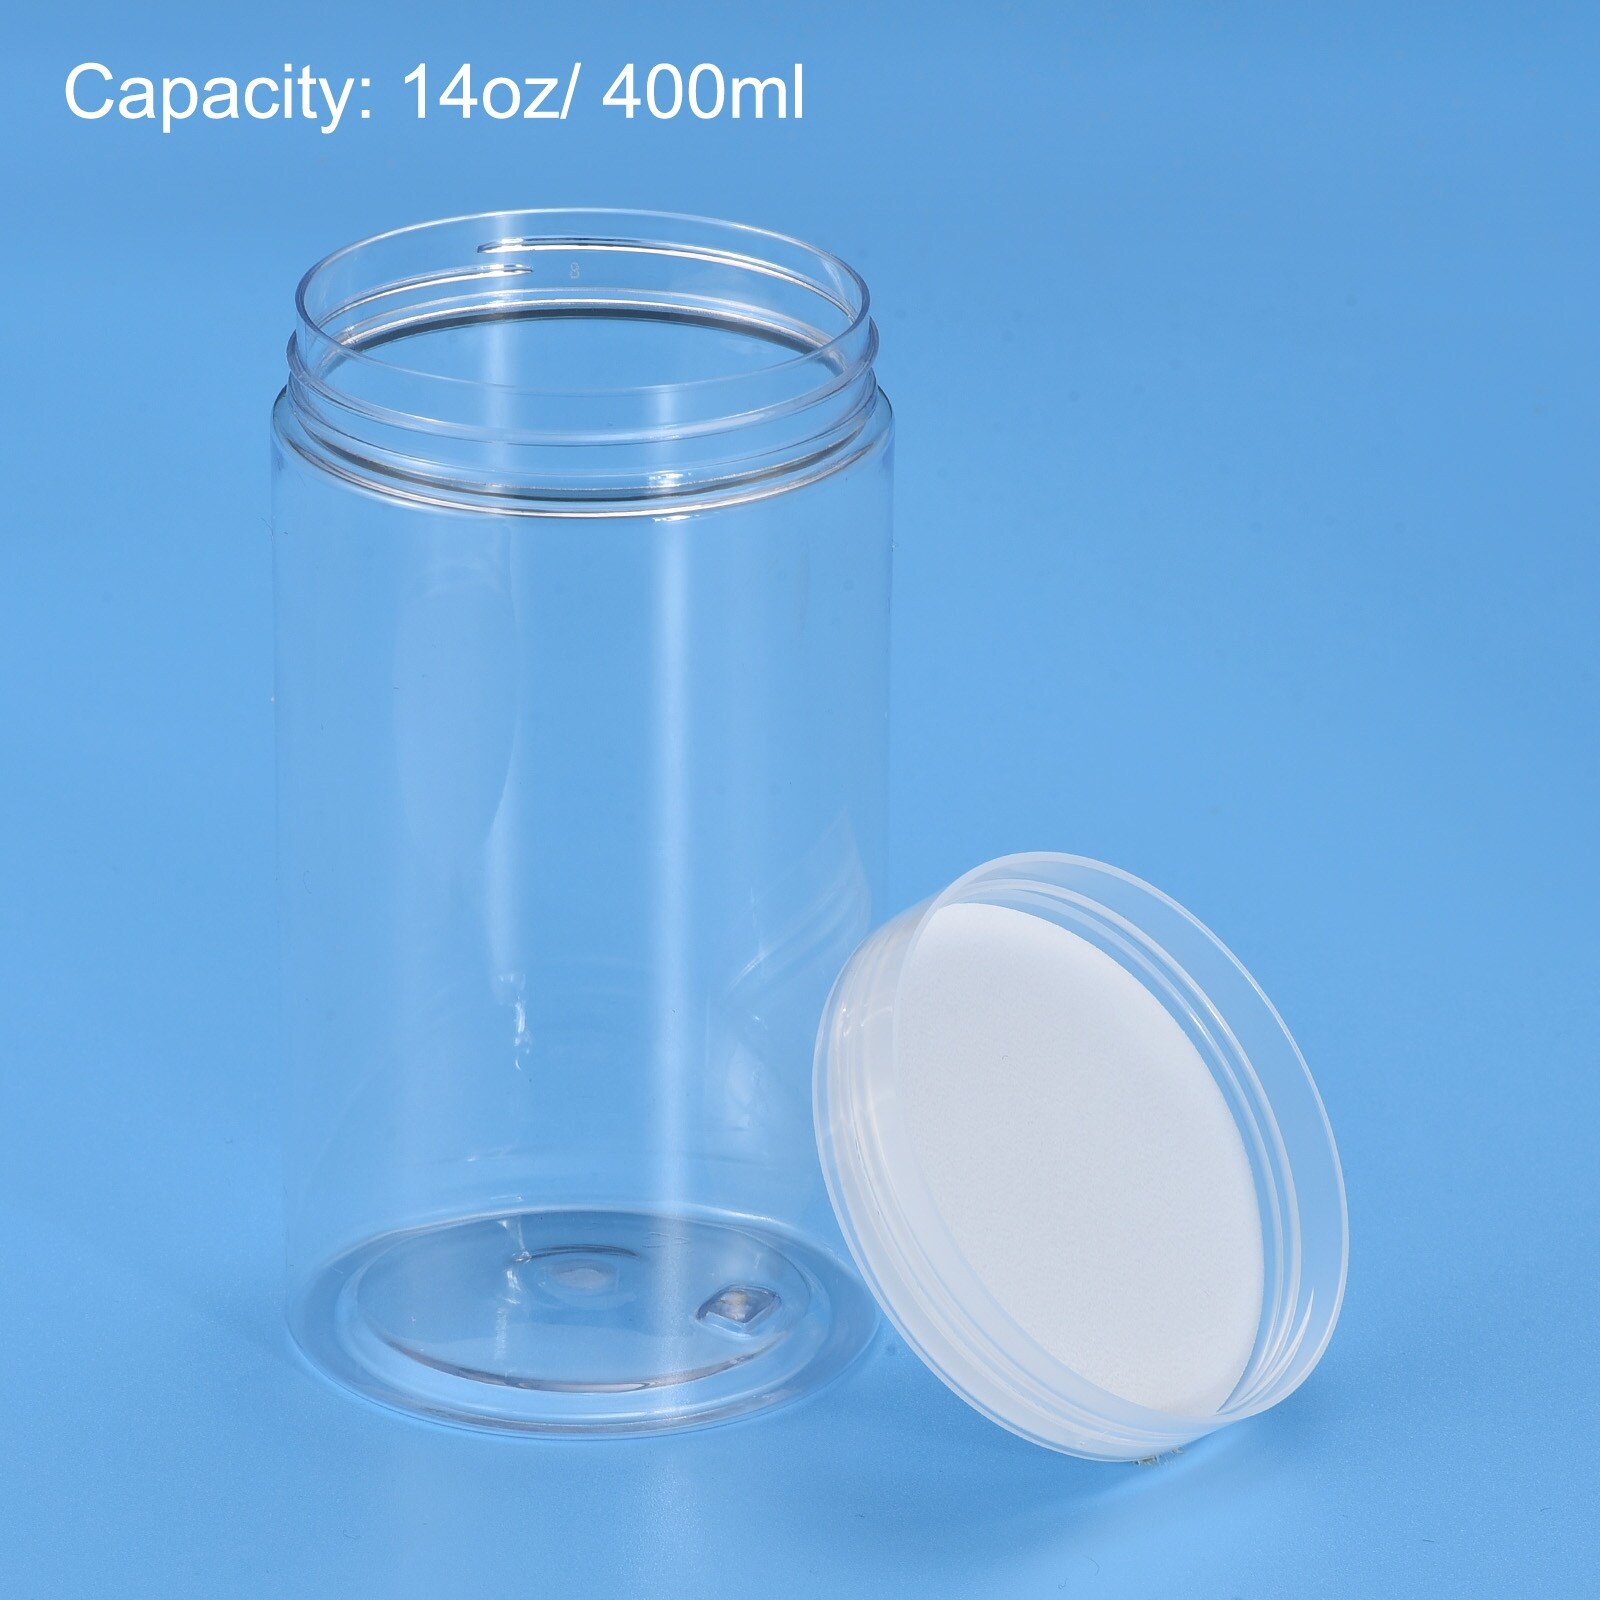 https://ak1.ostkcdn.com/images/products/is/images/direct/f0a5bc71db4a90ef5630a4274813bbaa12432c27/Round-Plastic-Jars-with-Transparent-Screw-Top-Lid%2C-2Pcs.jpg